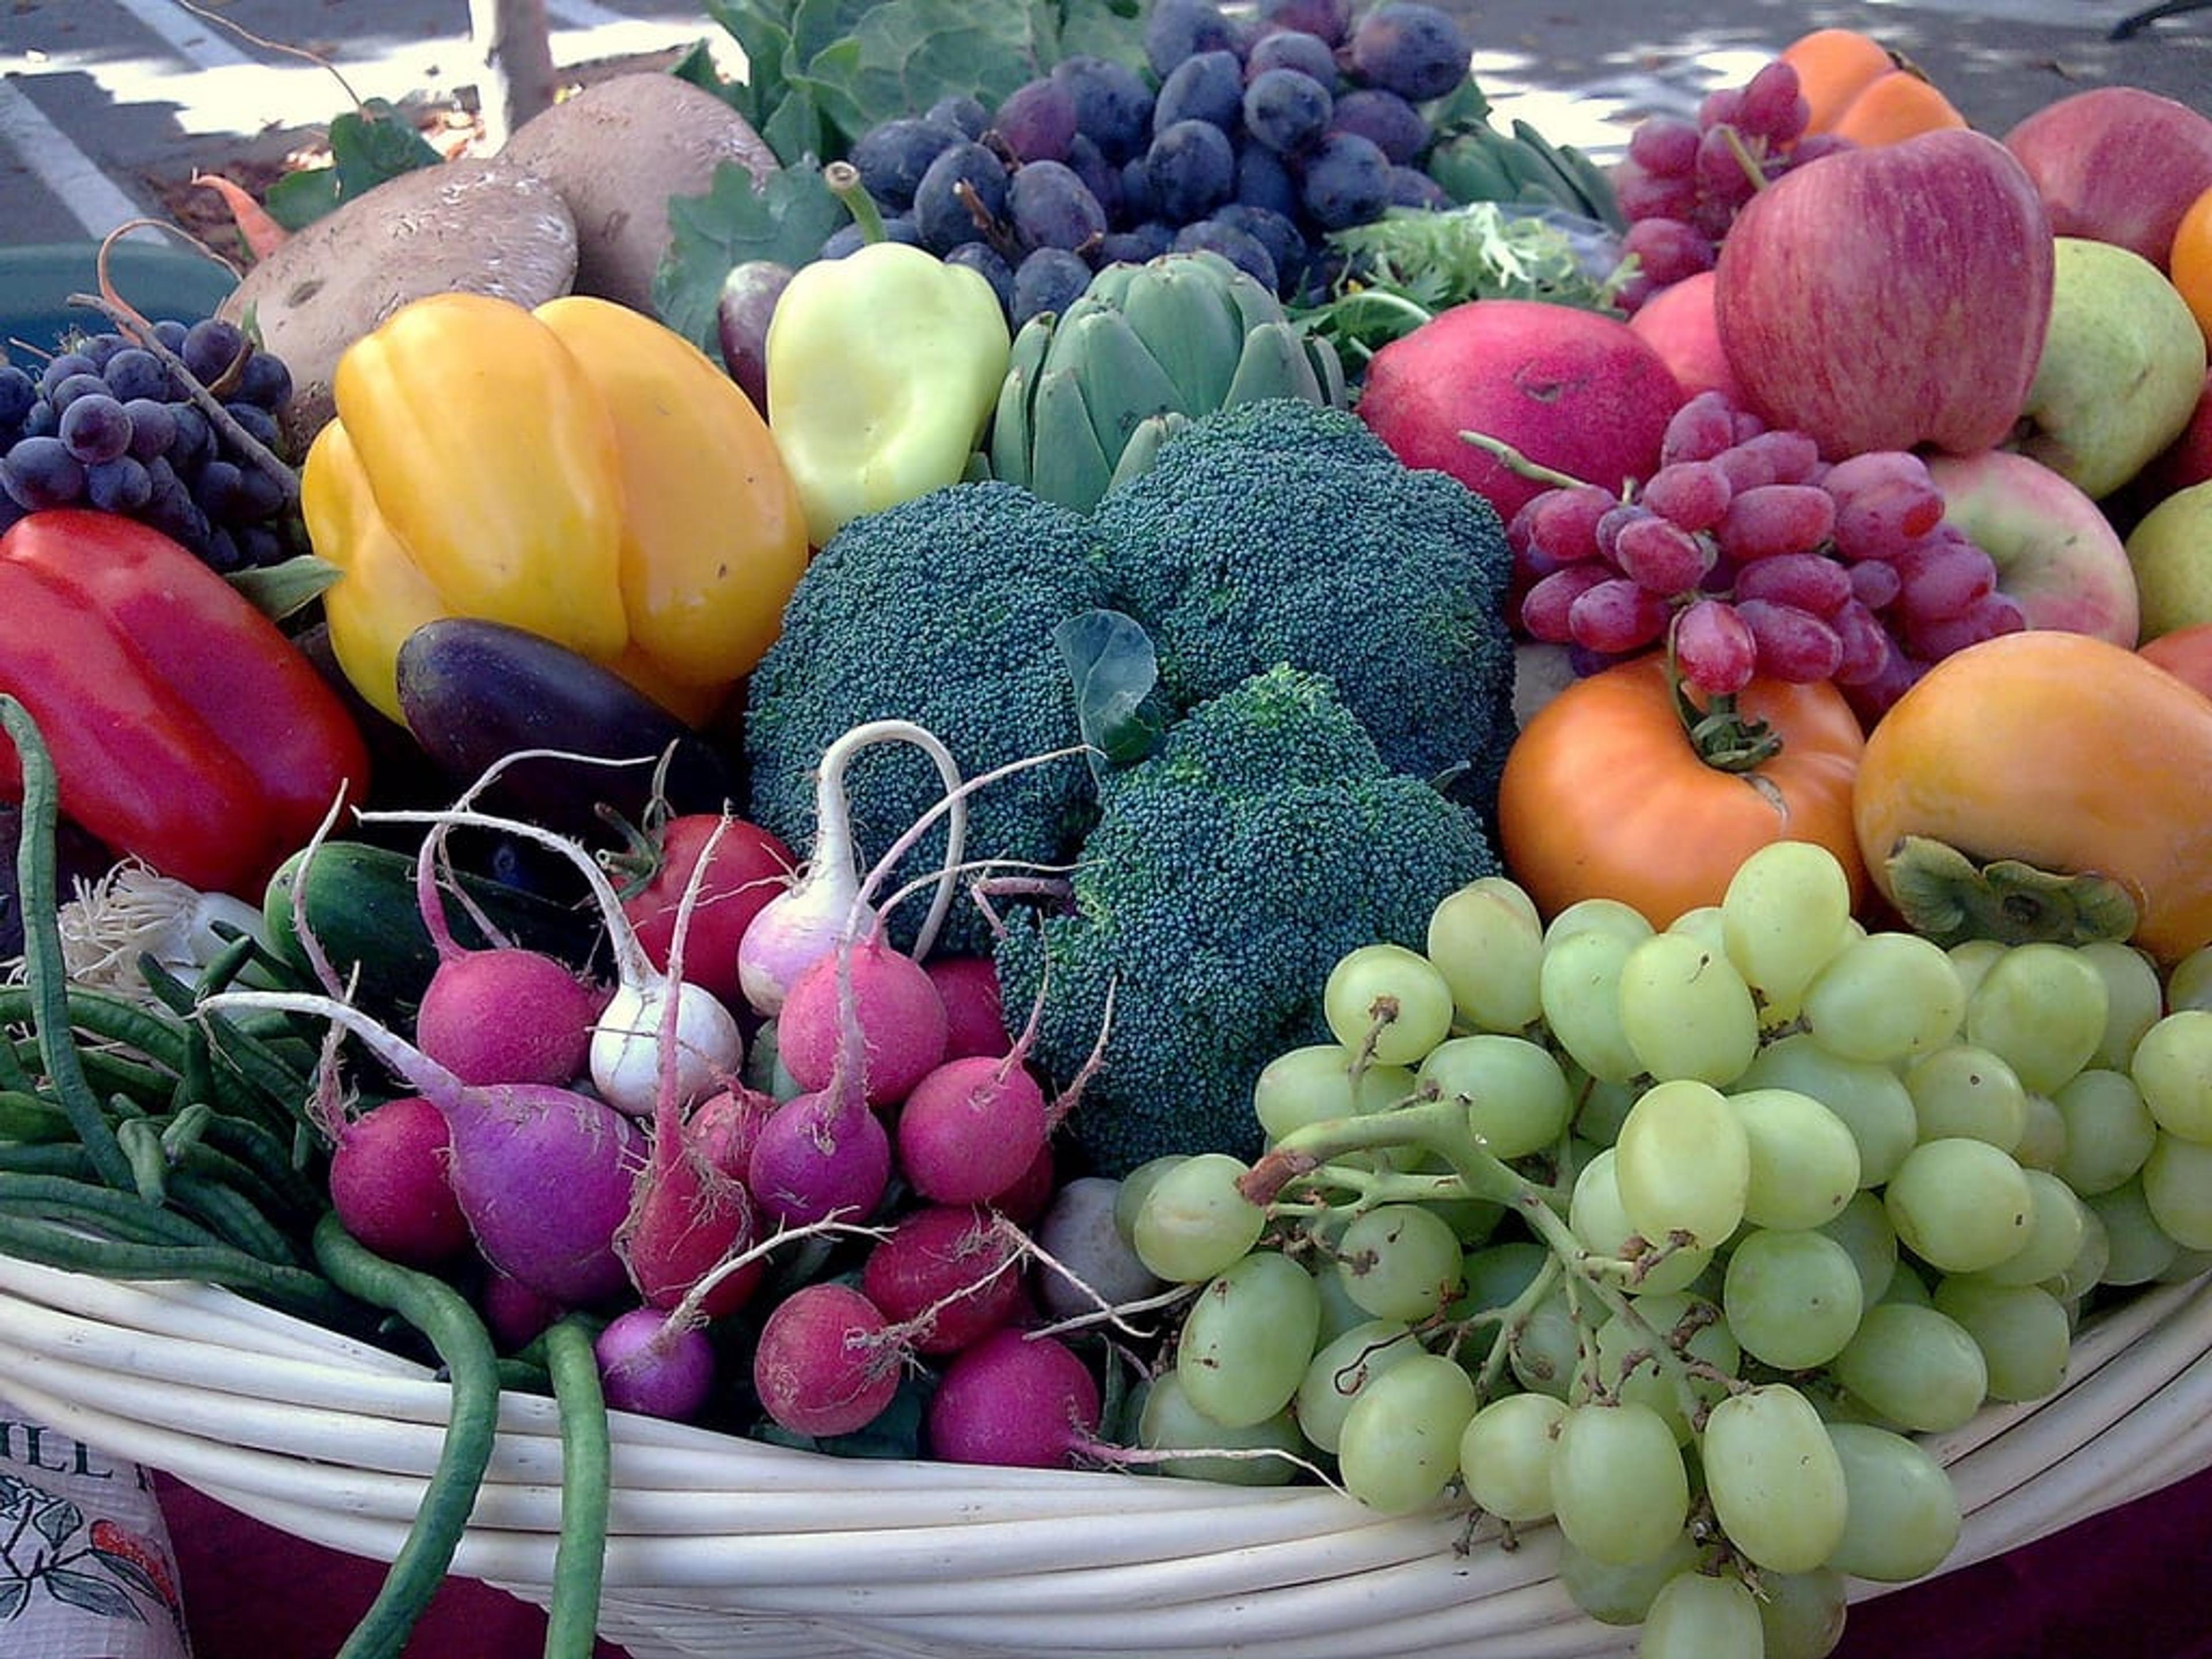 An overflowing basket of fruits and vegetables.